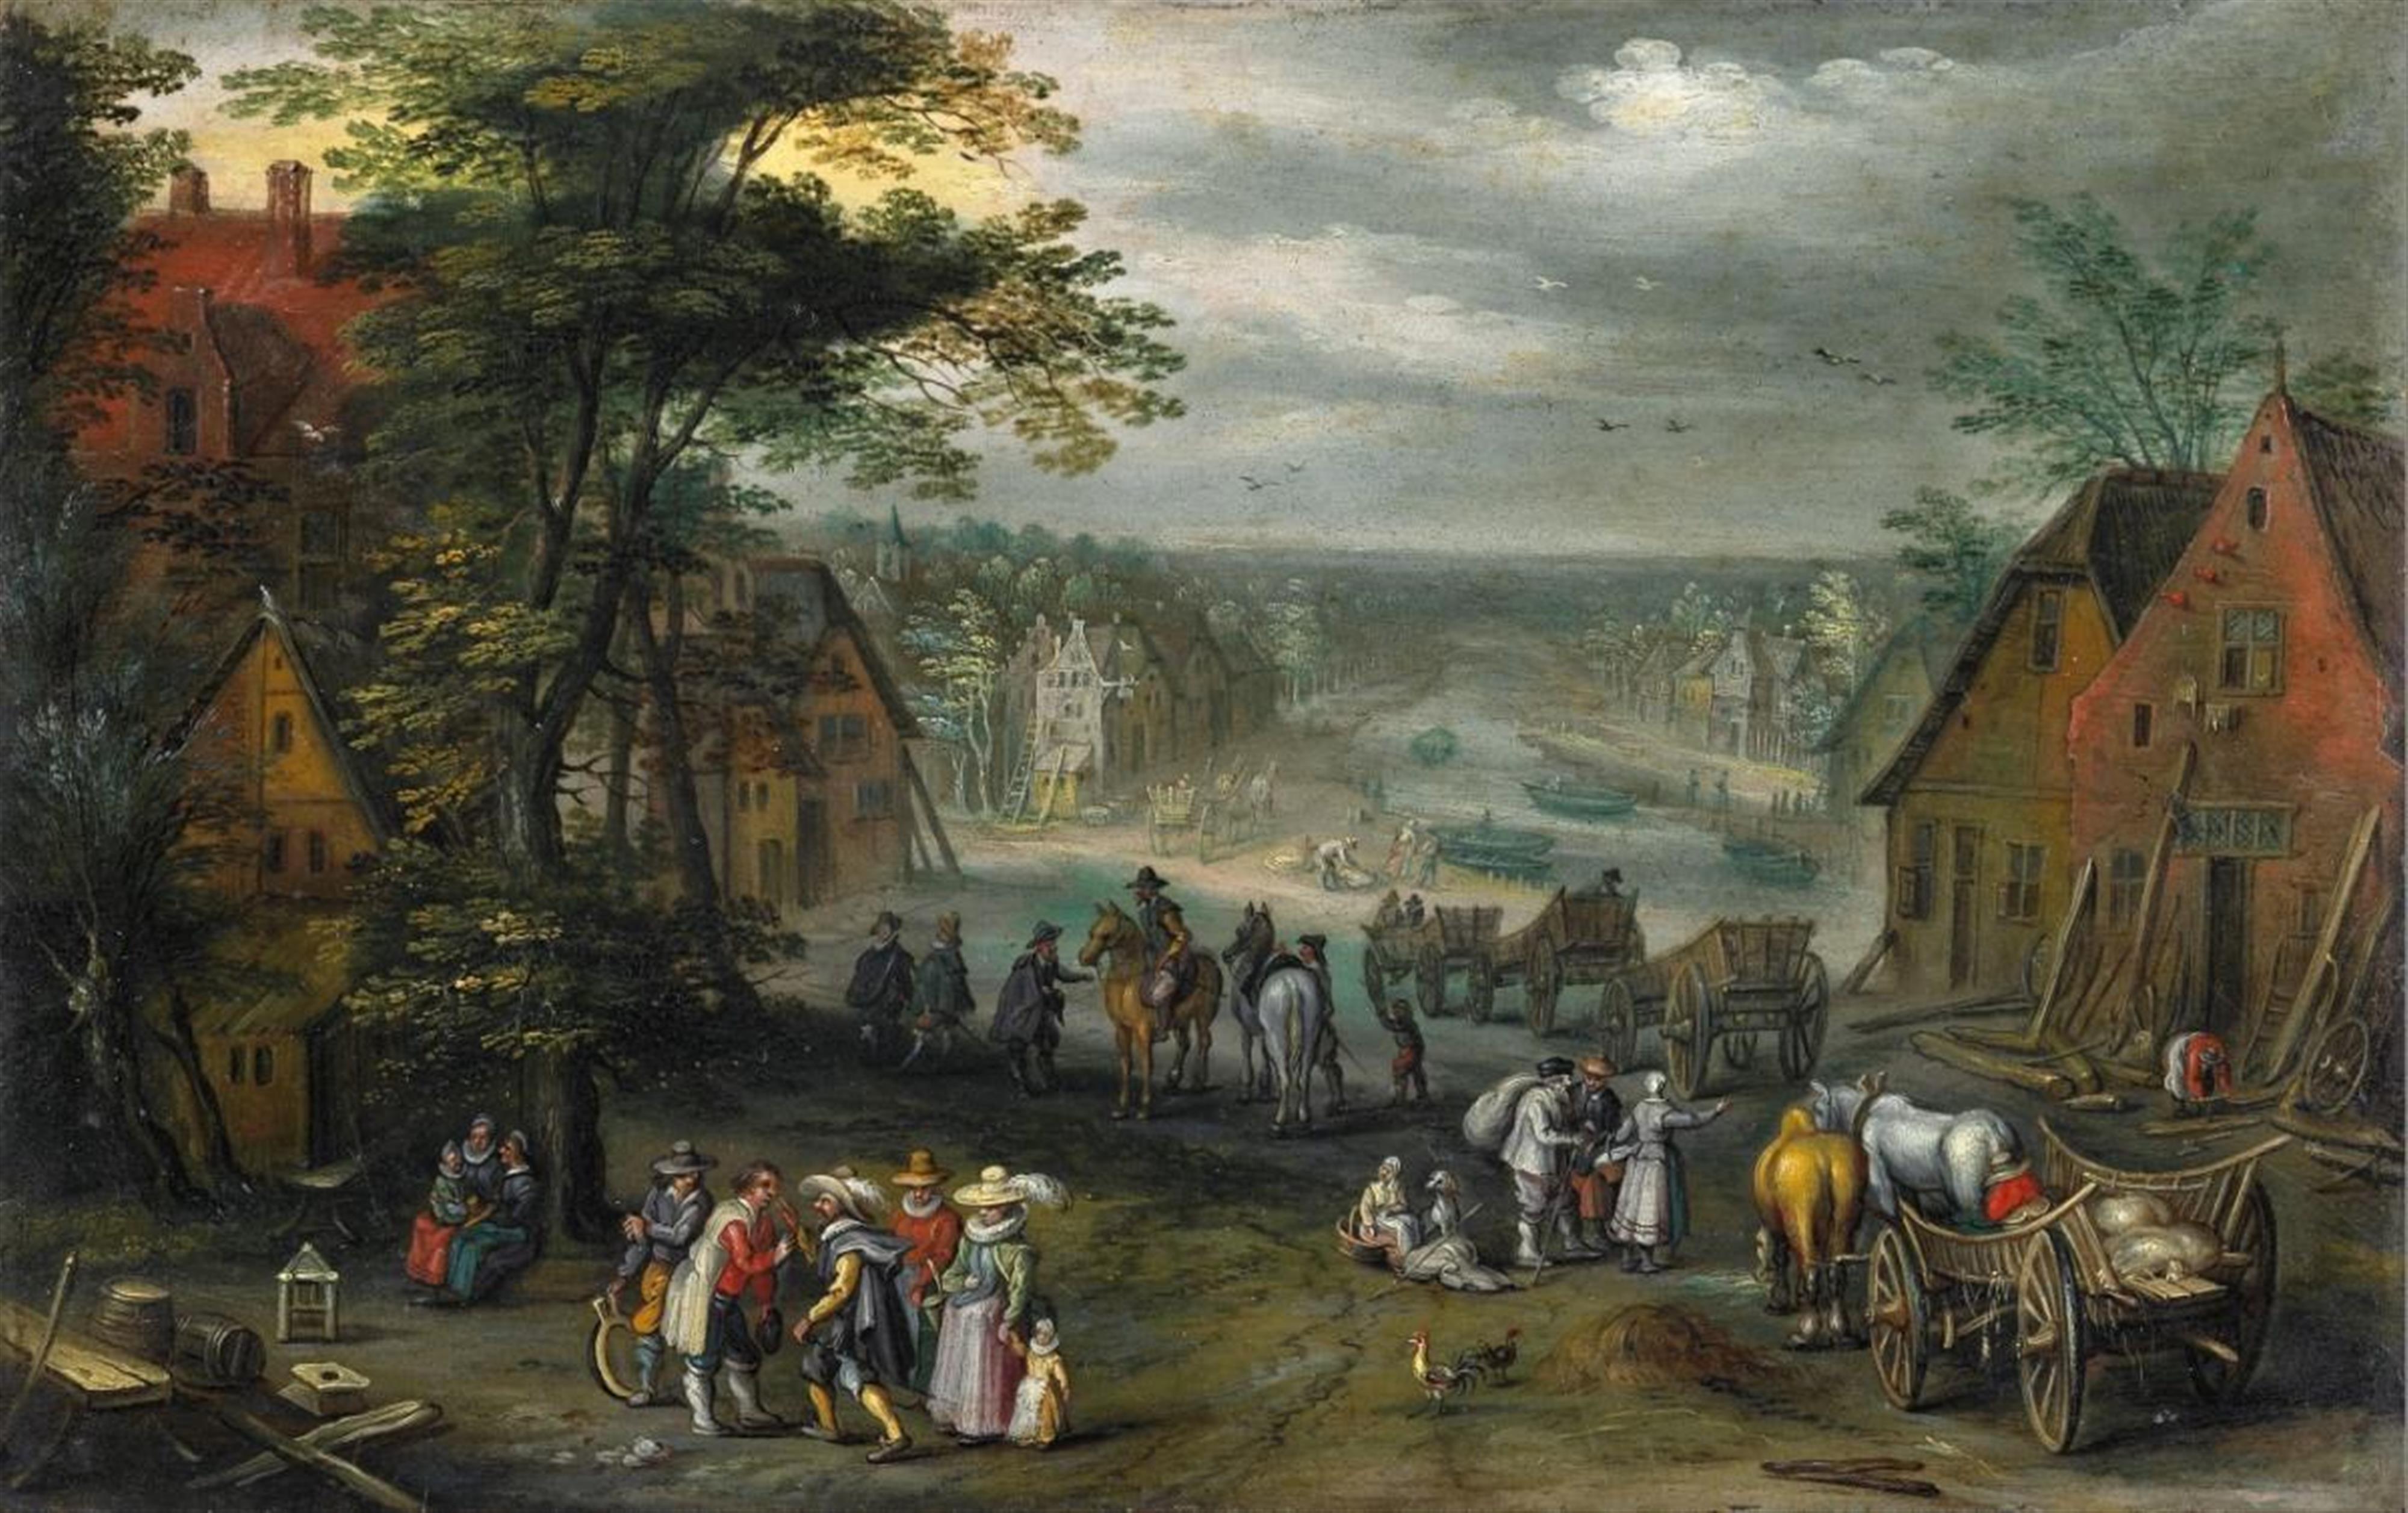 Jan Brueghel the Younger - VILLAGE STREET WITH CANAL - image-1